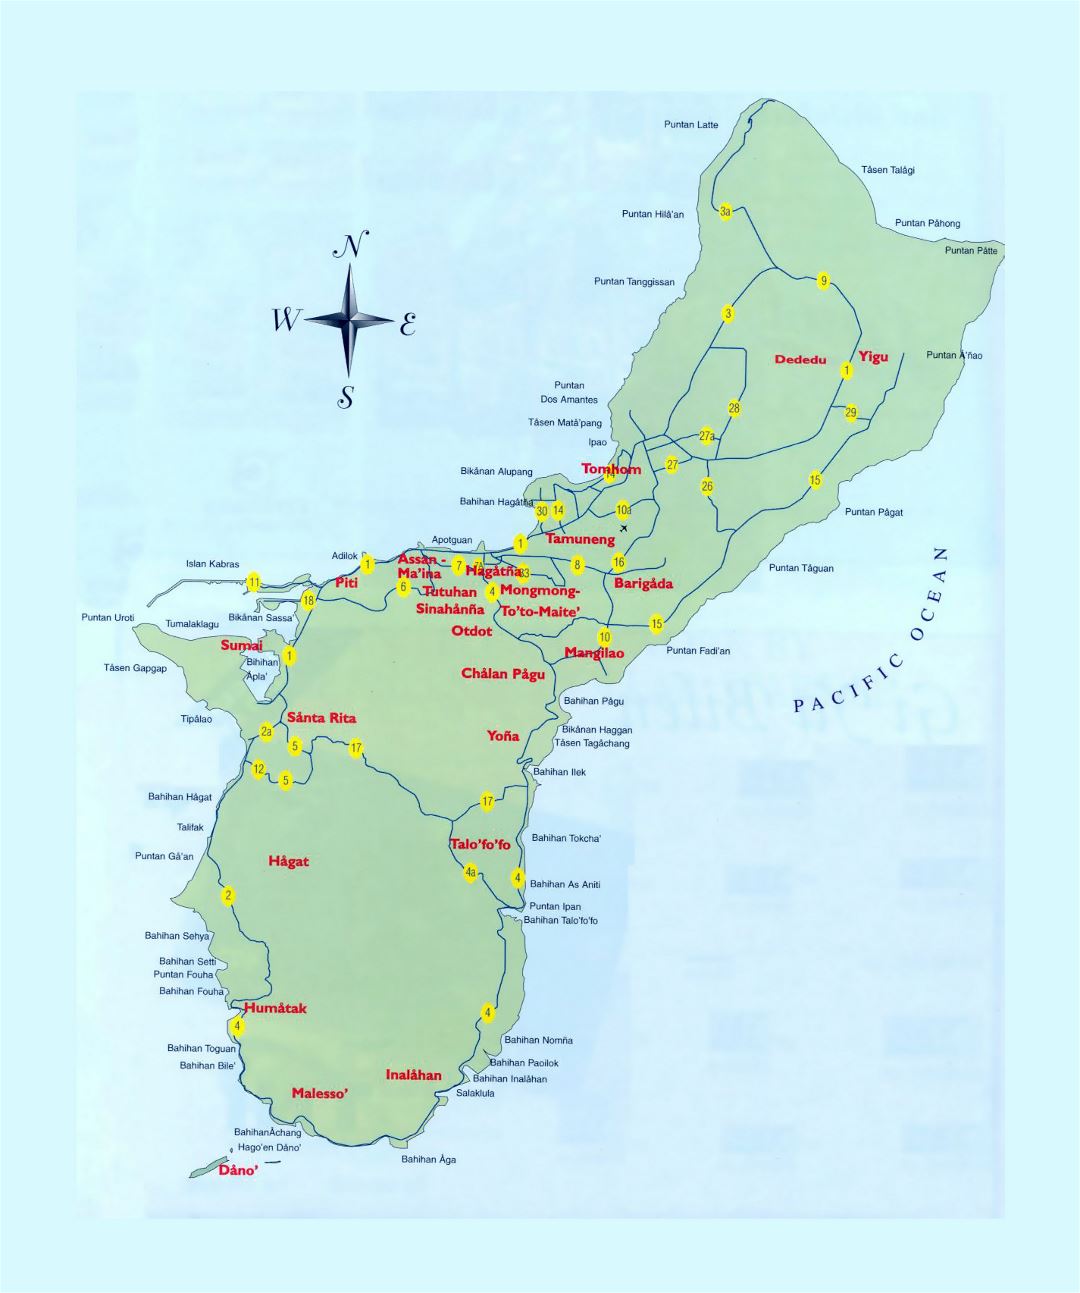 Large tourist map of Guam with other marks